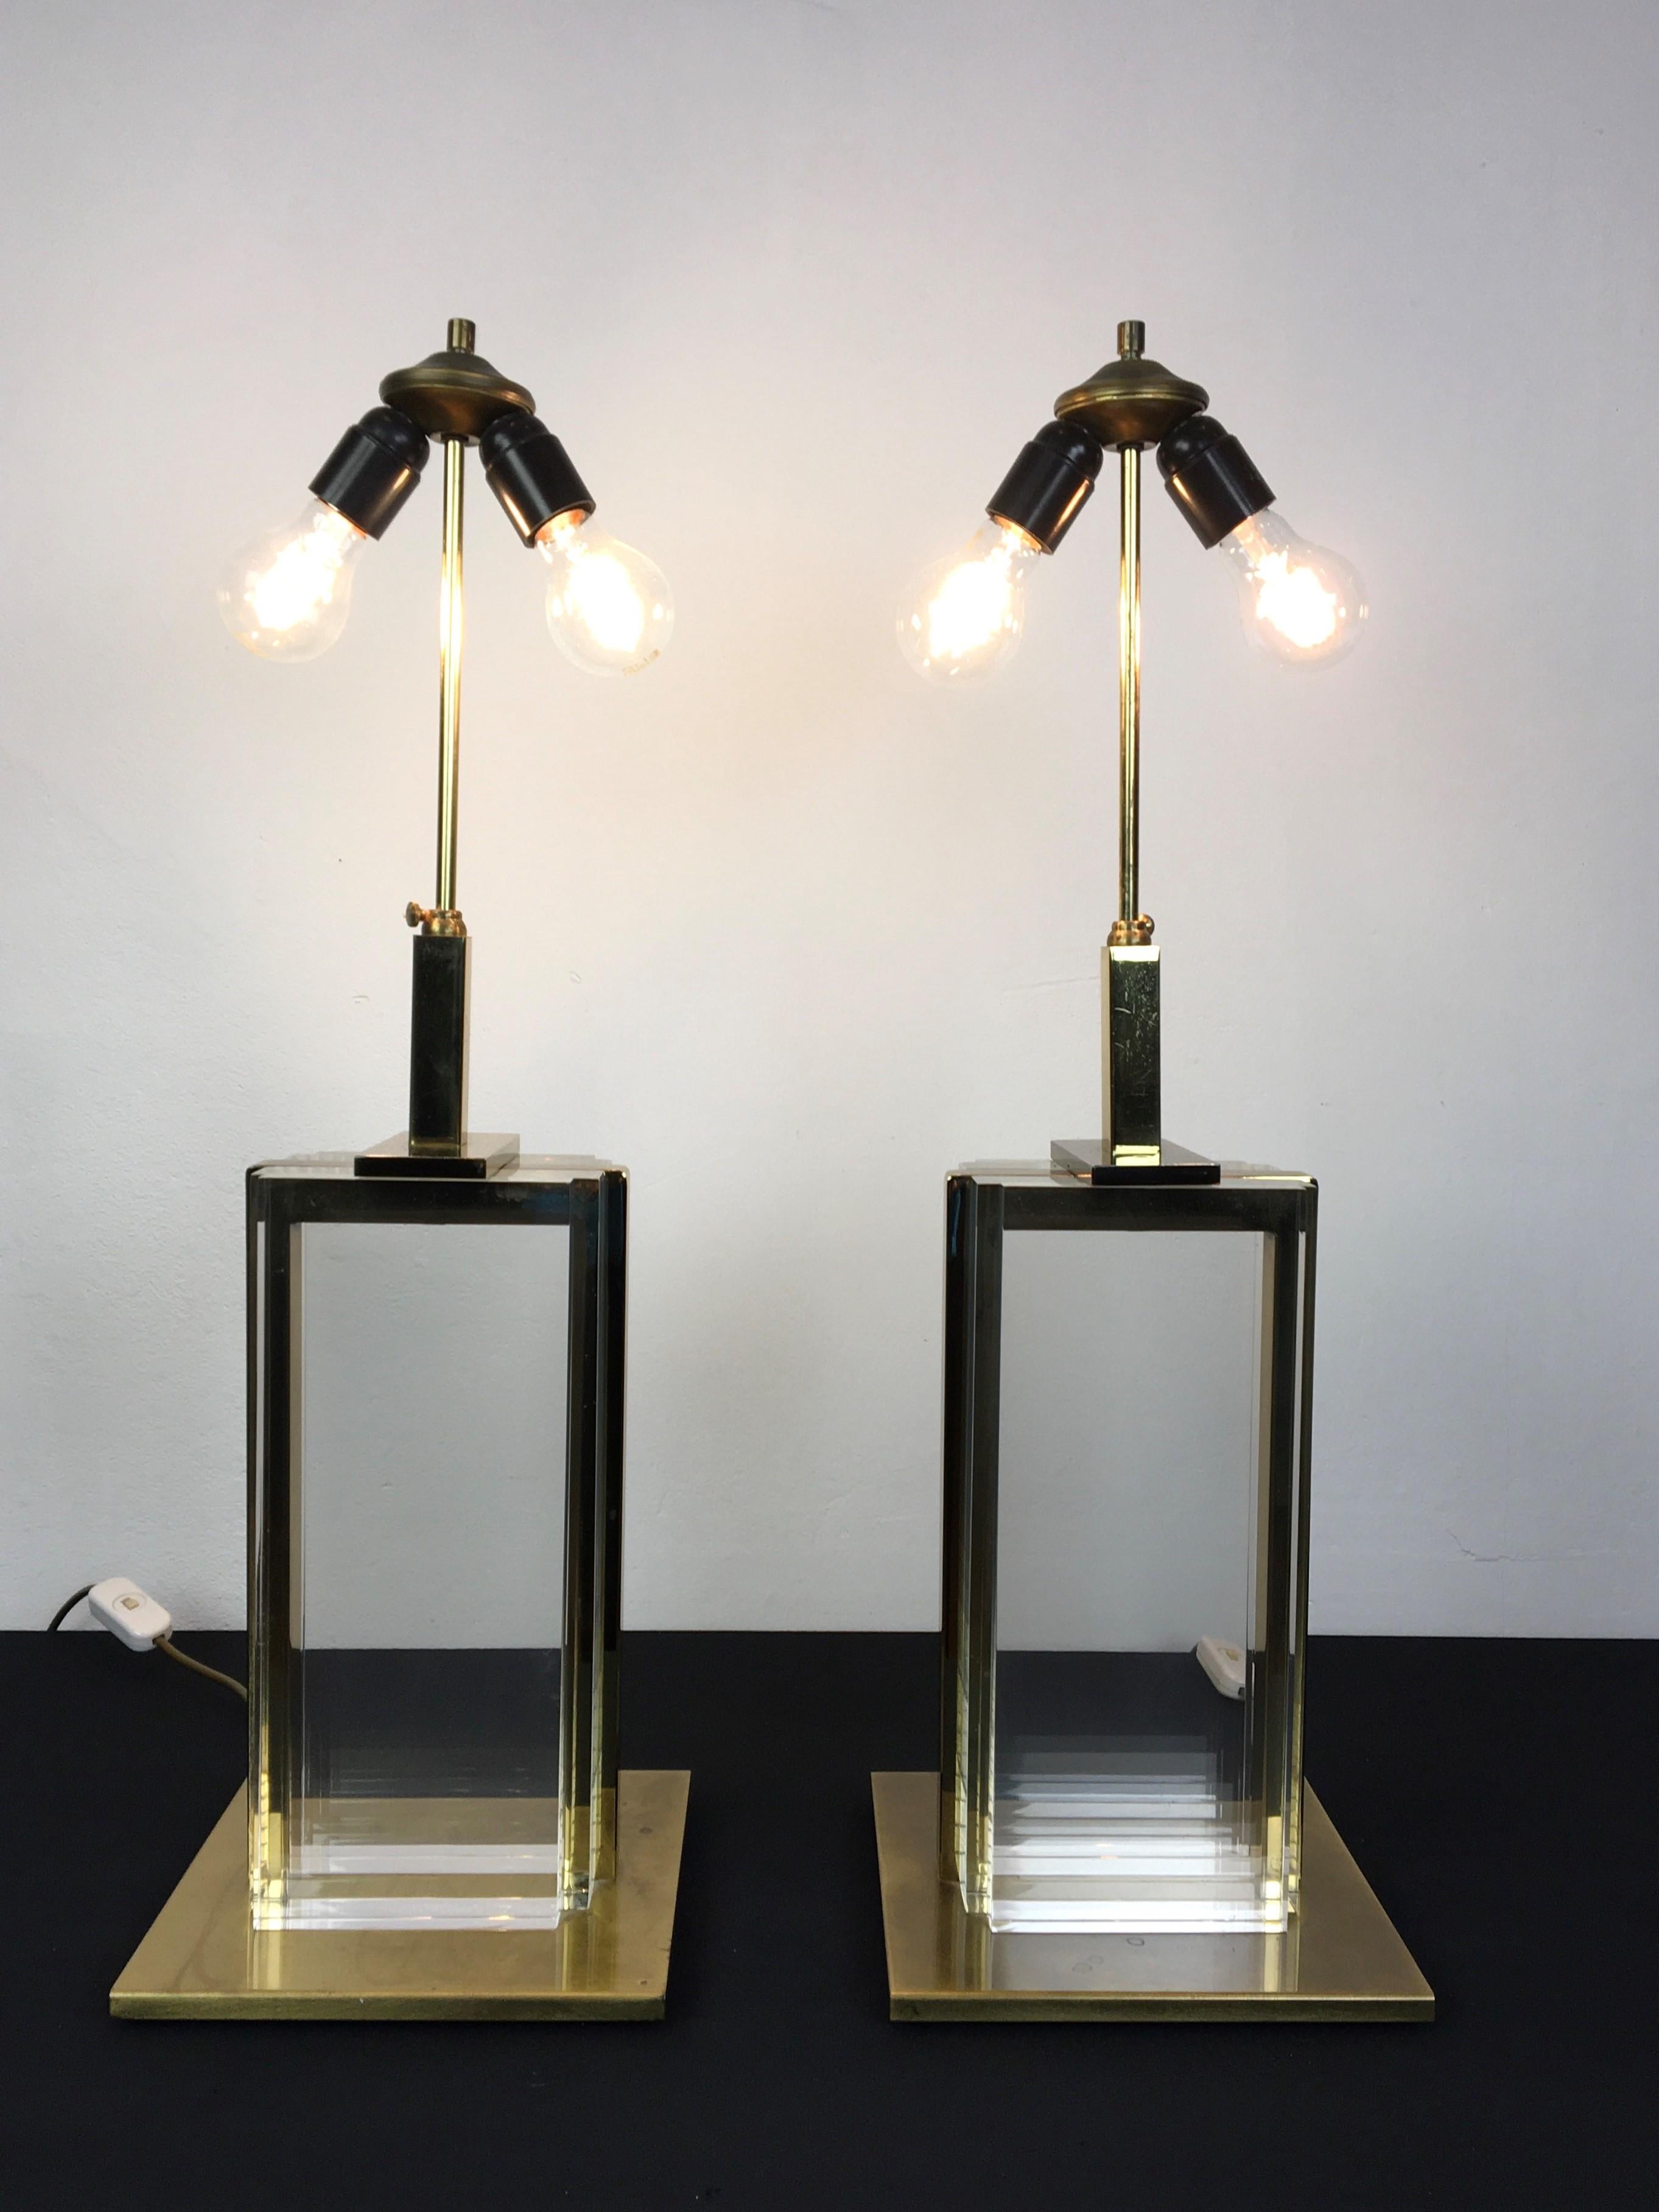 Hollywood Regency Pair of Belgo Chrome Table Lamps, Lucite and Brass, 1970s For Sale